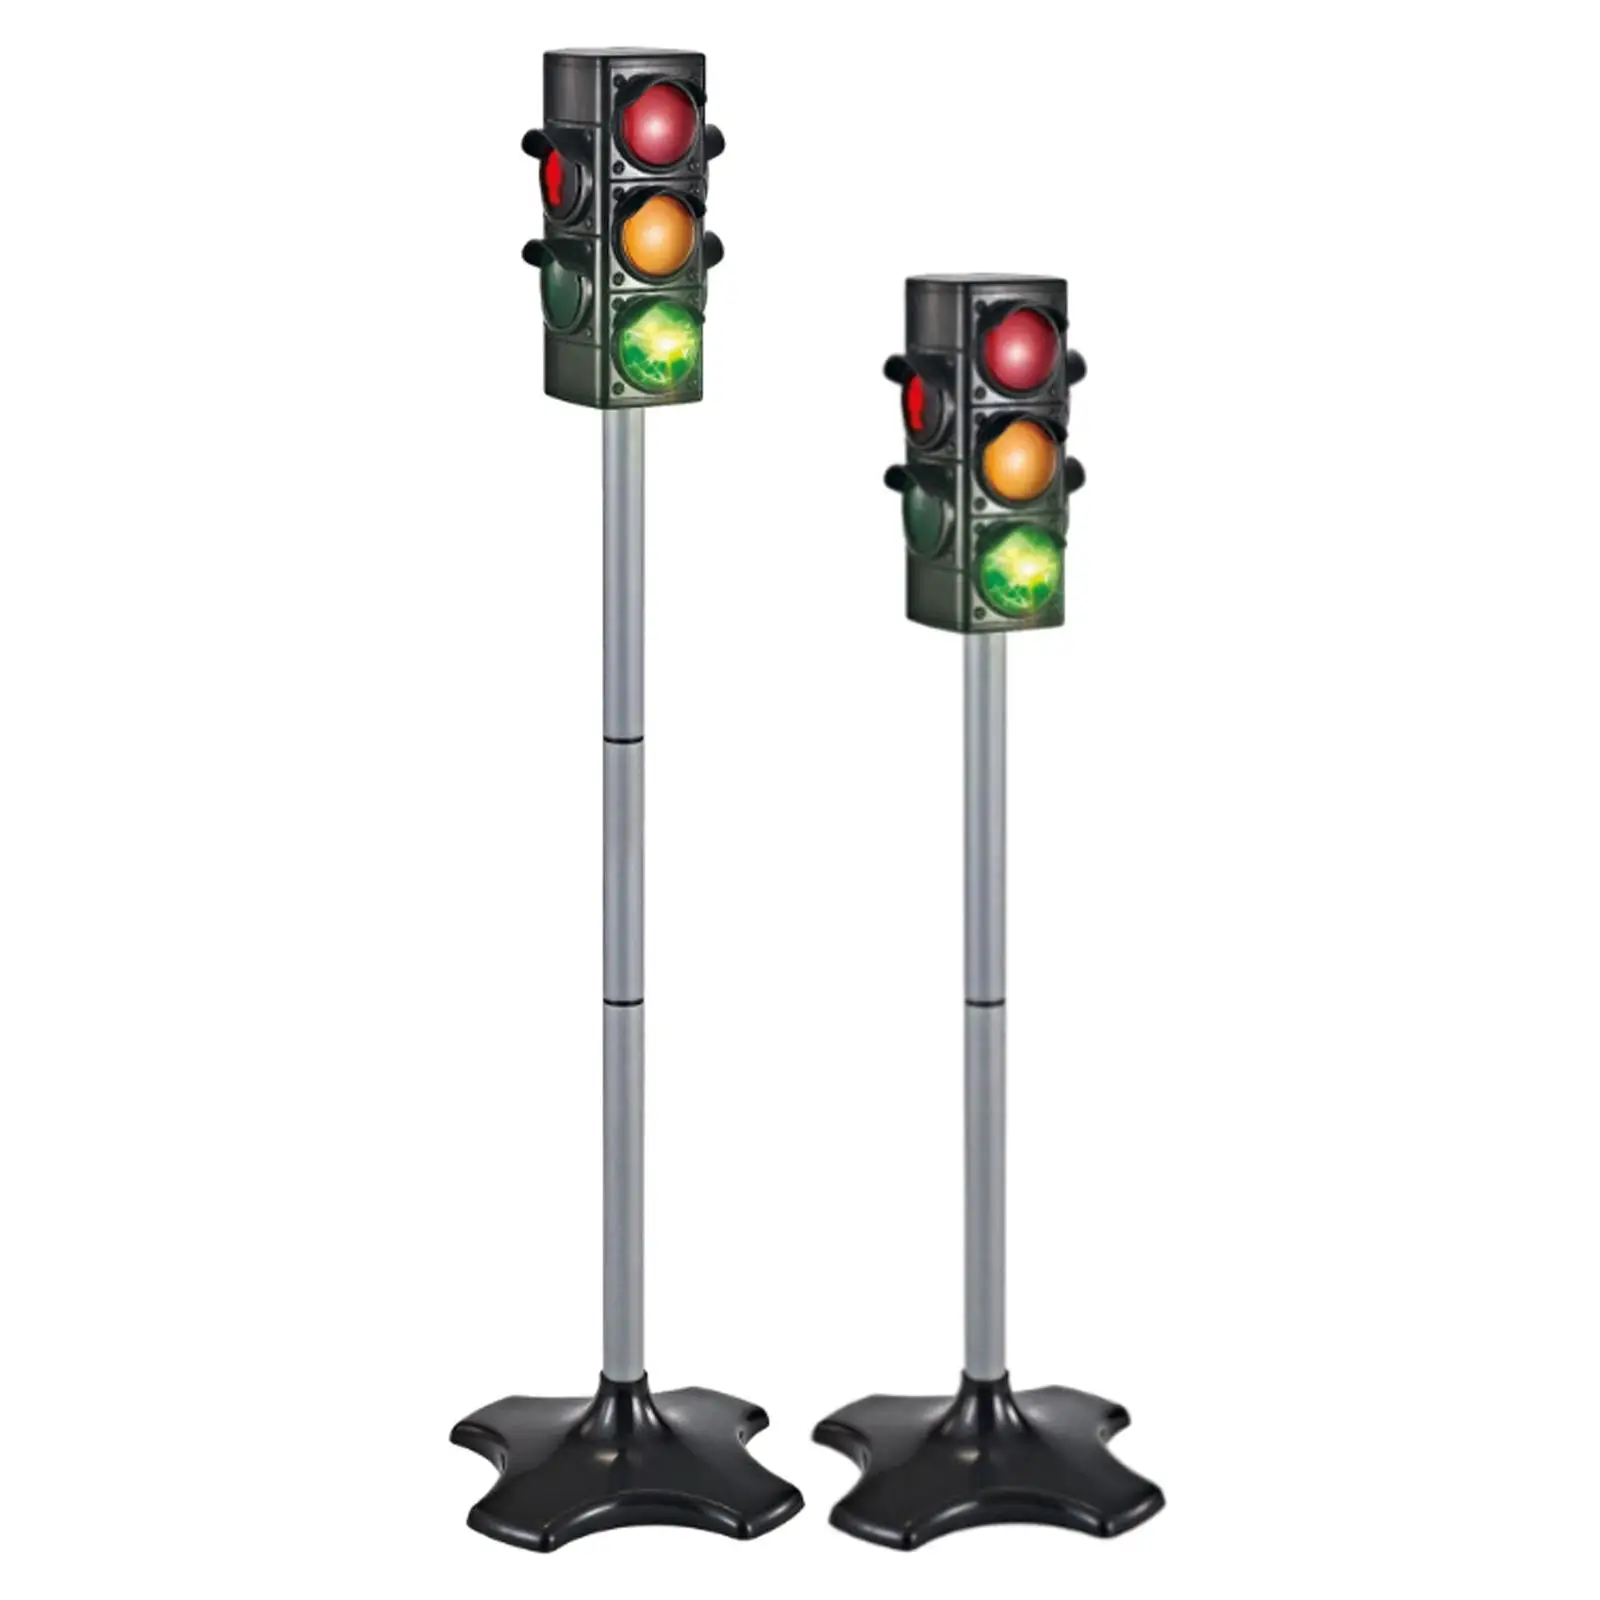 Electric Traffic Light Stop Light with Sound Light Party Pretend Play Toy